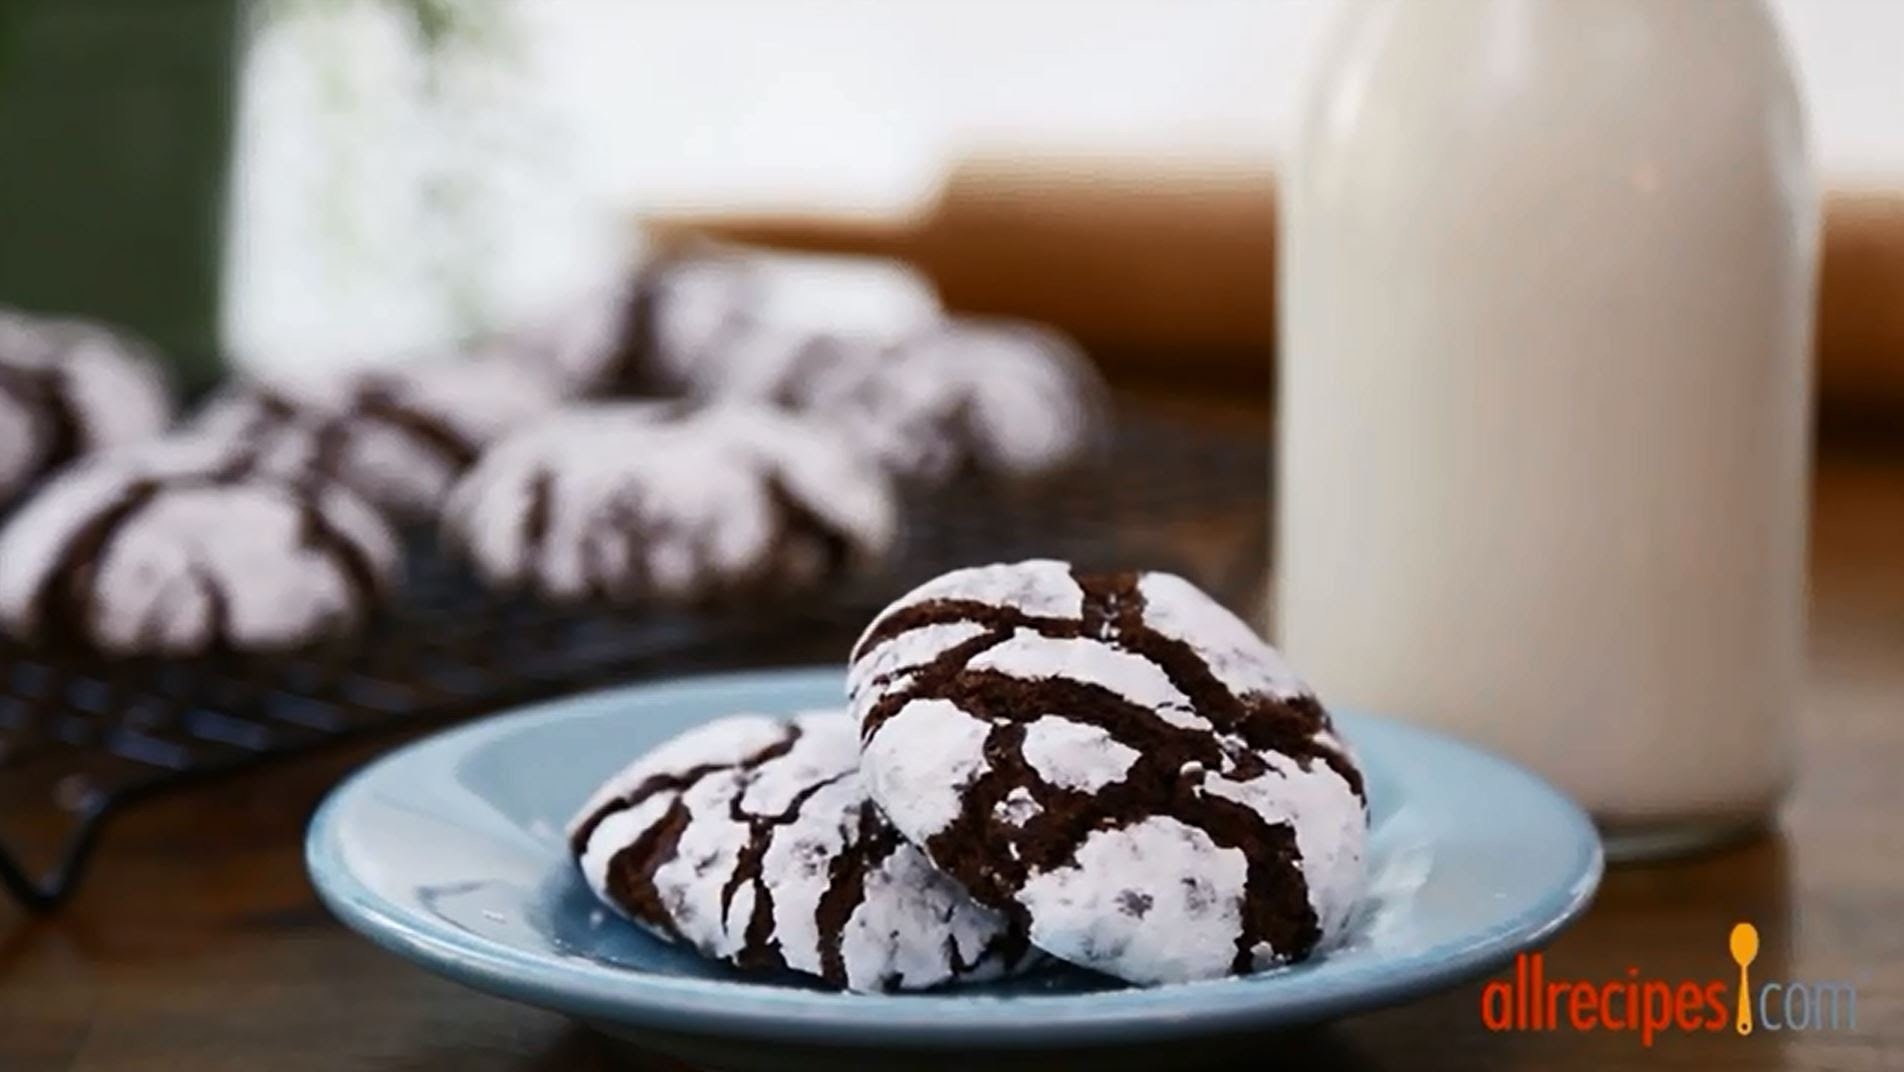 How to Make Chocolate Crinkles | Cookie Recipes | AllRecipes